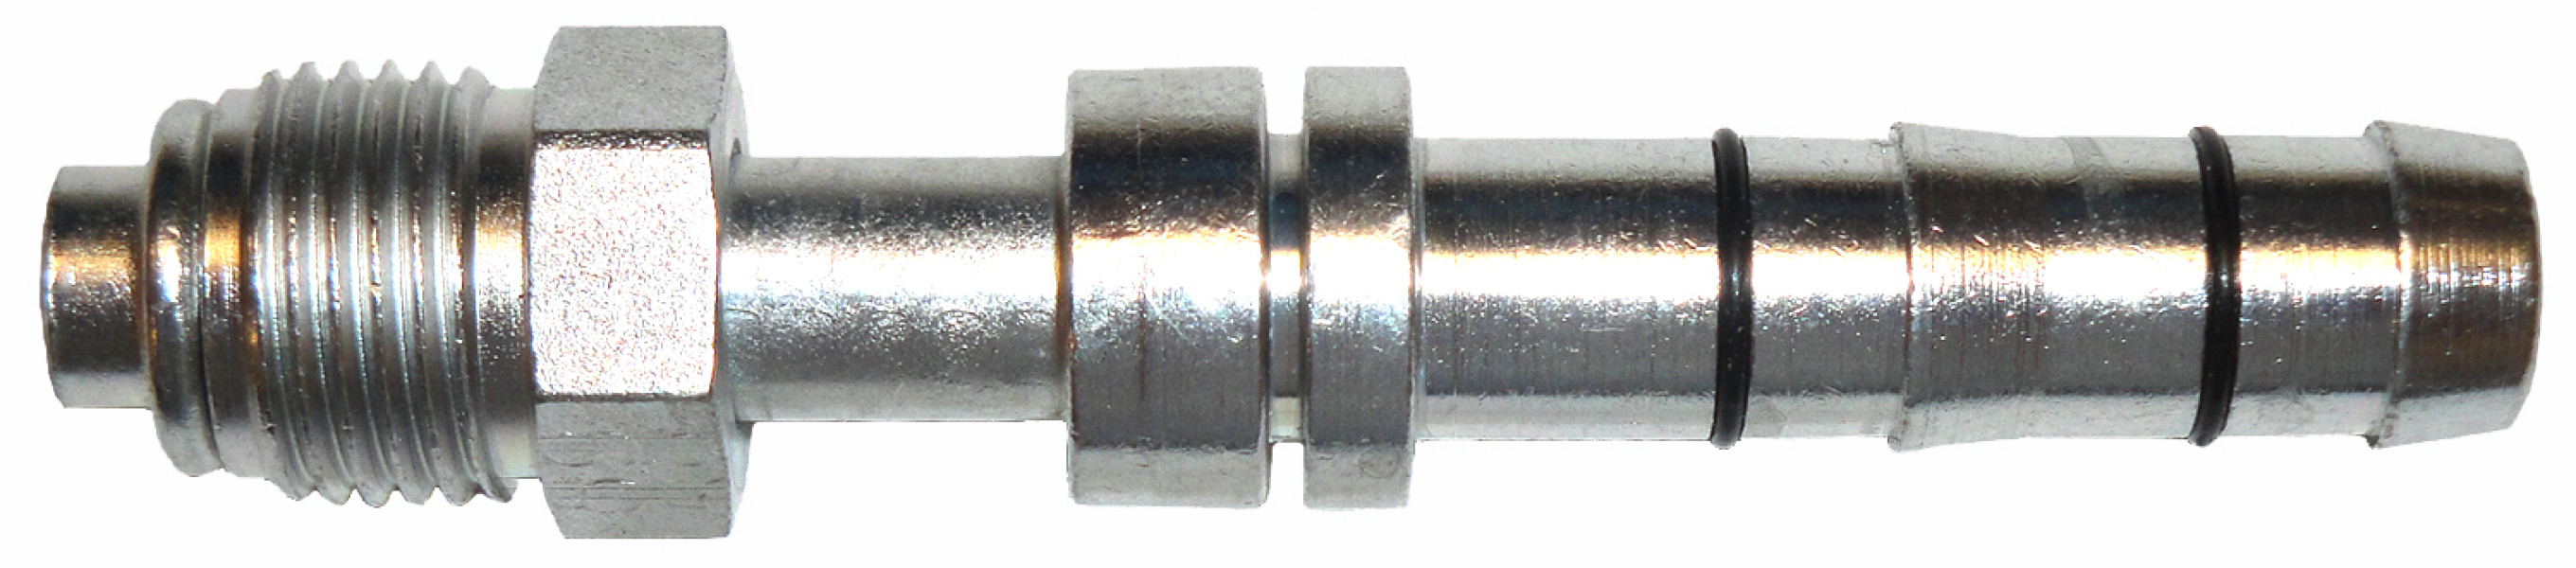 Image of A/C Refrigerant Hose Fitting from Sunair. Part number: FJ3052-0608S